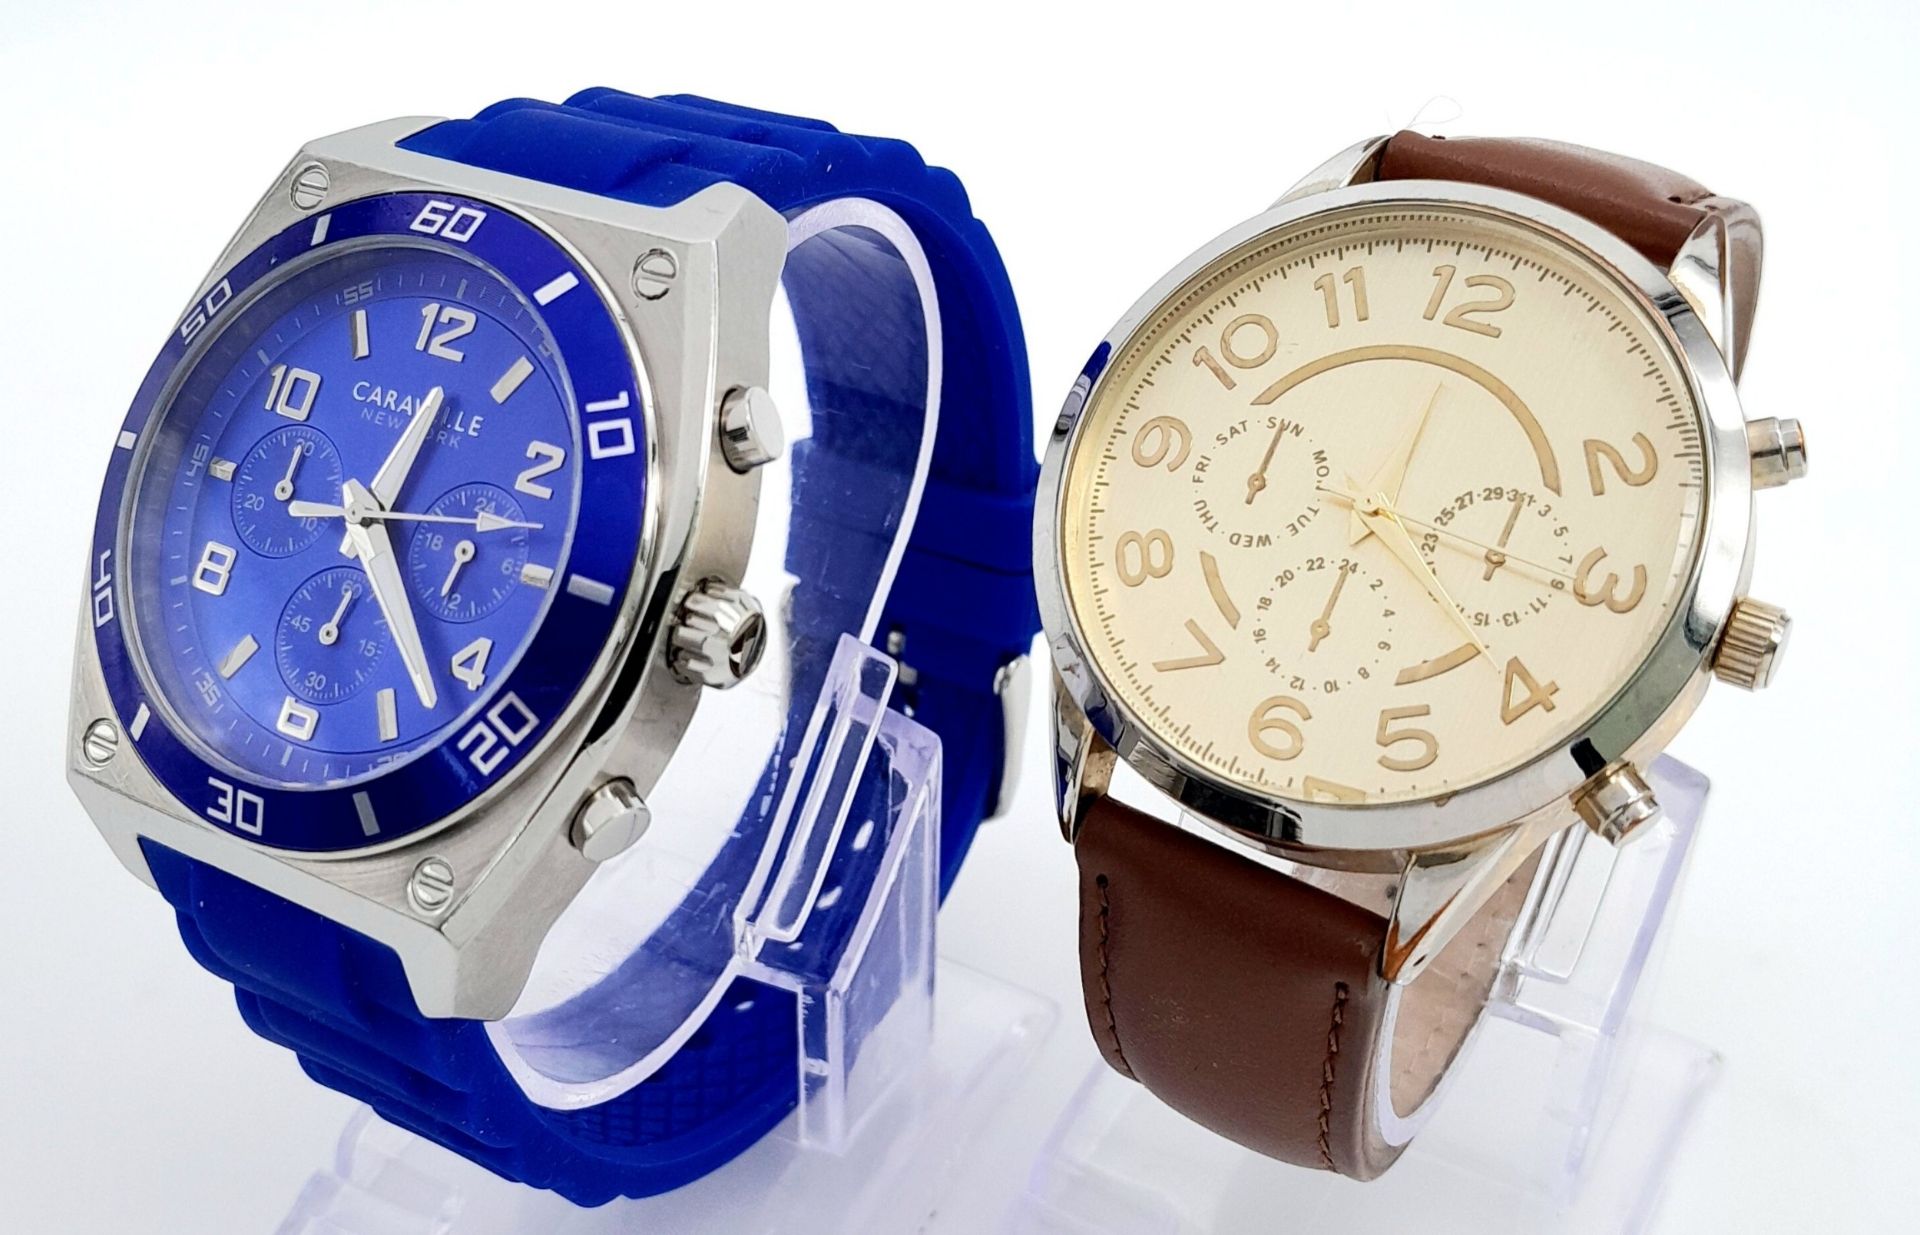 Two Men’s Quartz Watches, Comprising: 1) A Blue Face Chronograph Sports Watch by Caravelle New - Image 3 of 7